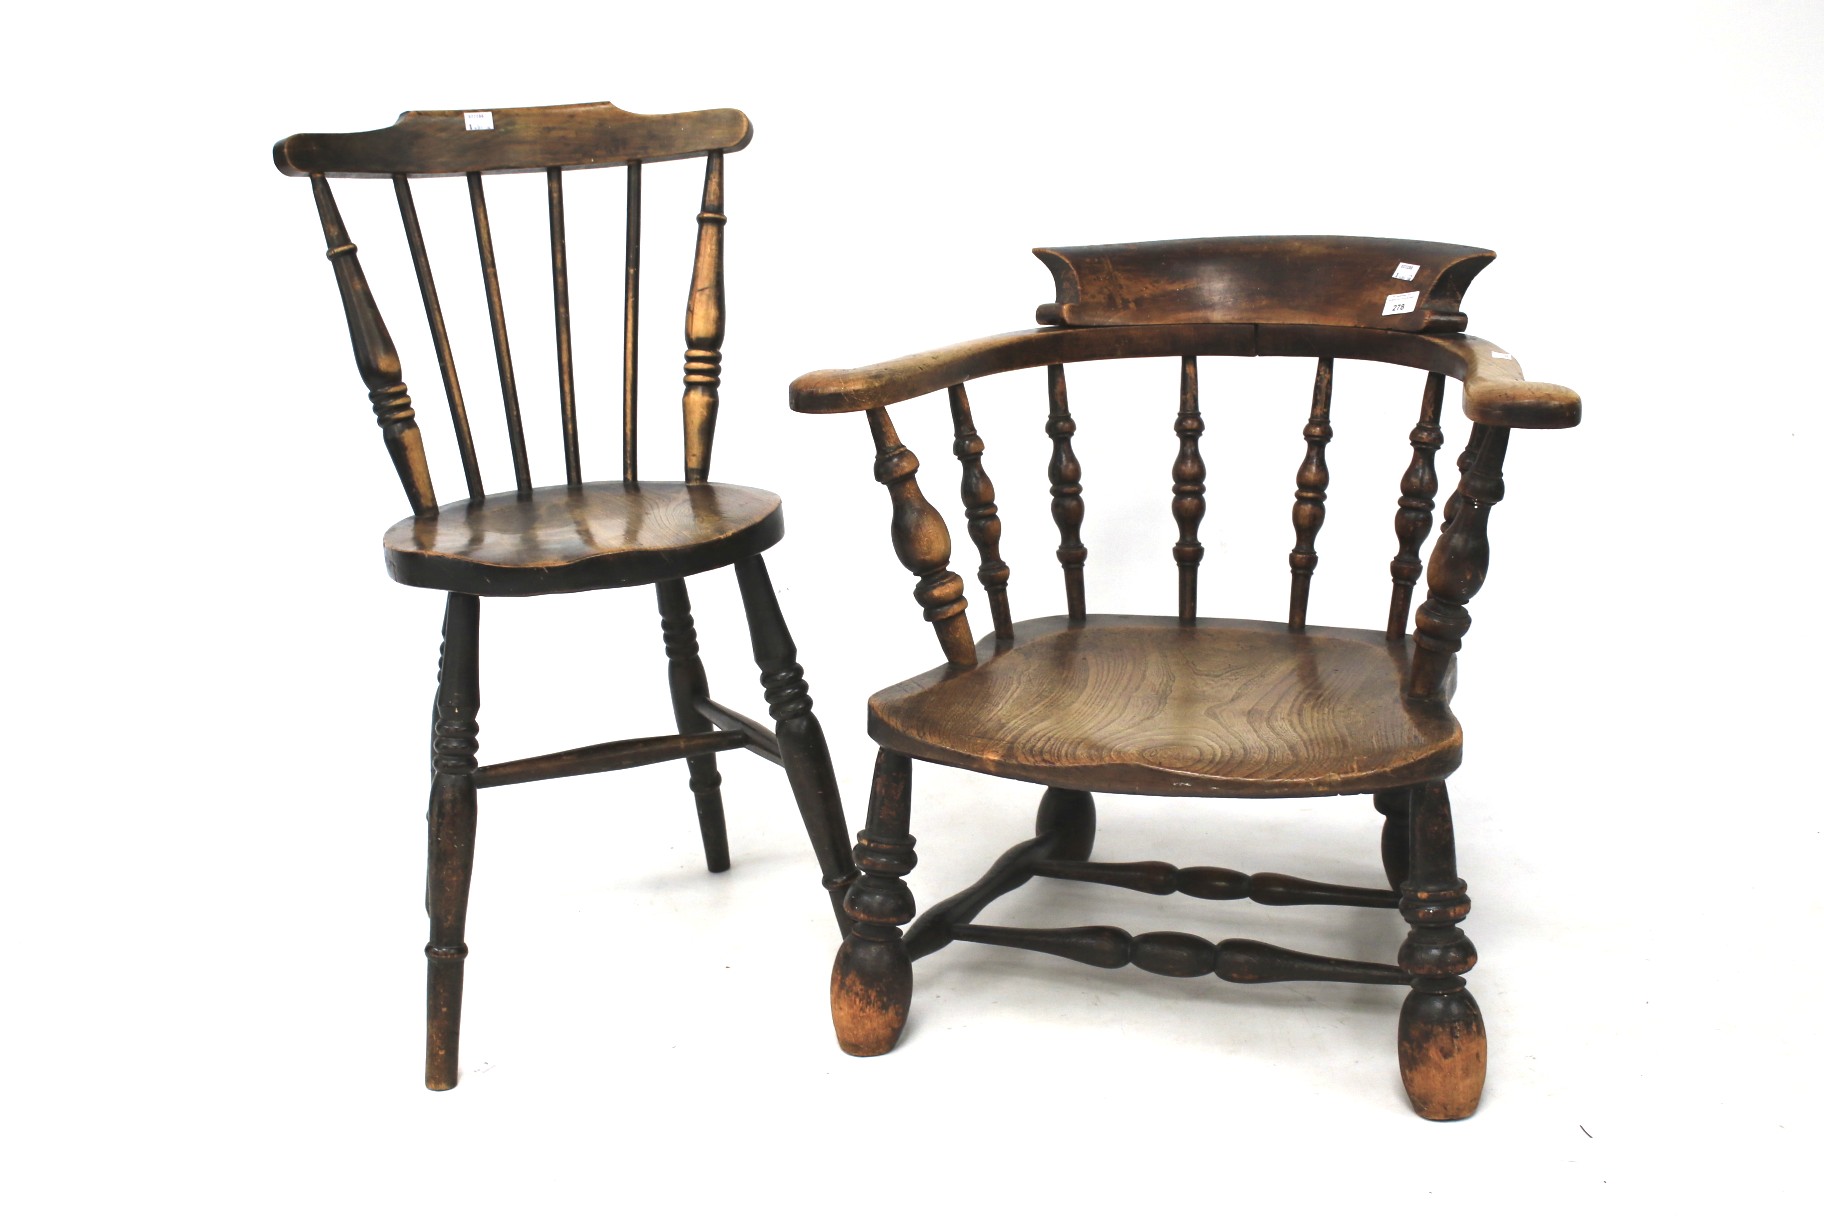 A 19th century shortened arm chair and a similar single chair.